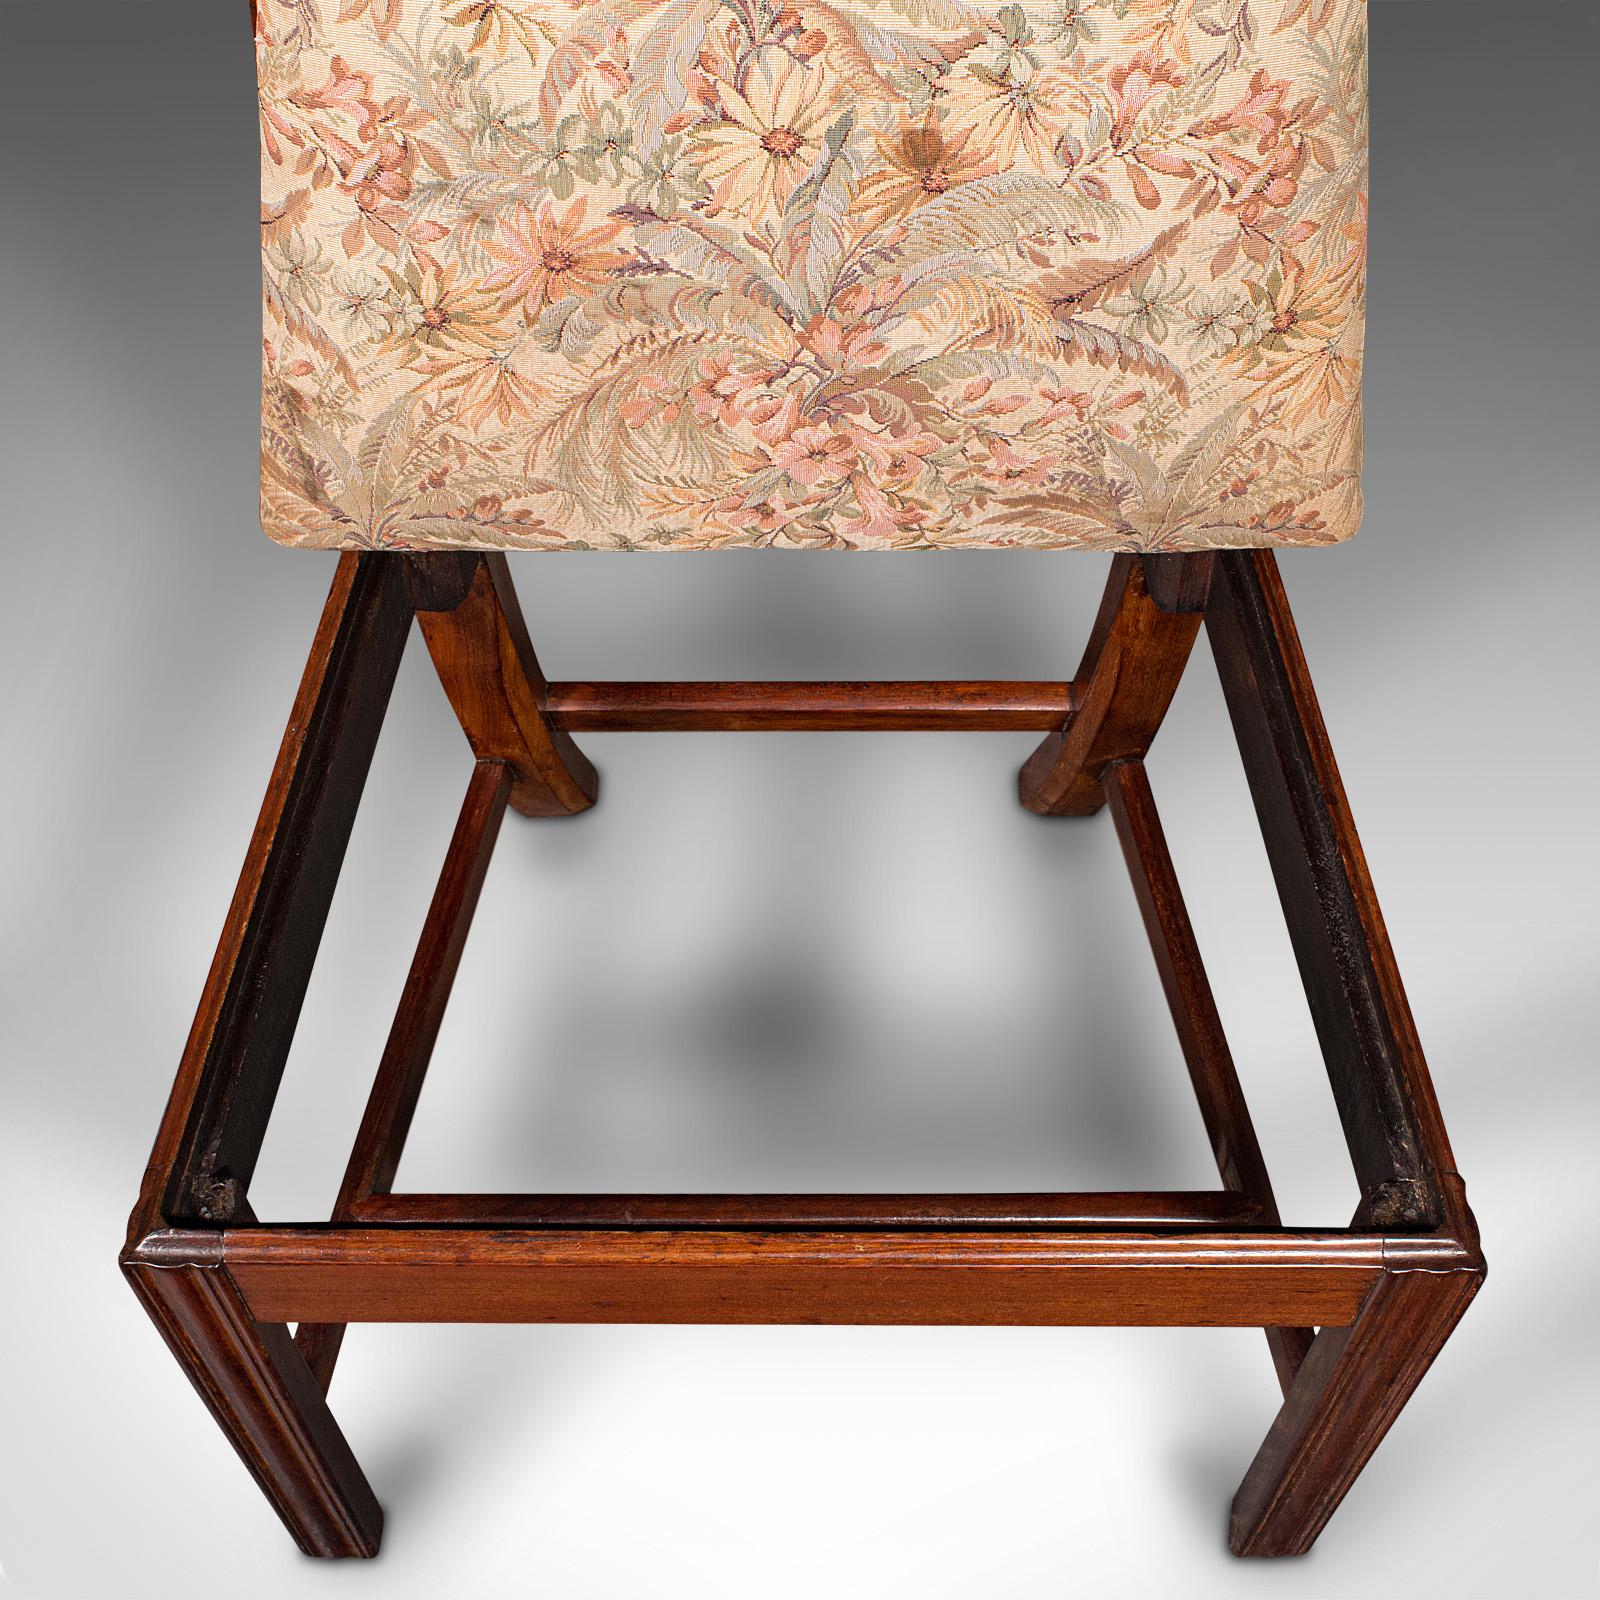 6 Antique Dining Room Chairs, English, Walnut, After Chippendale, Georgian, 1800 4